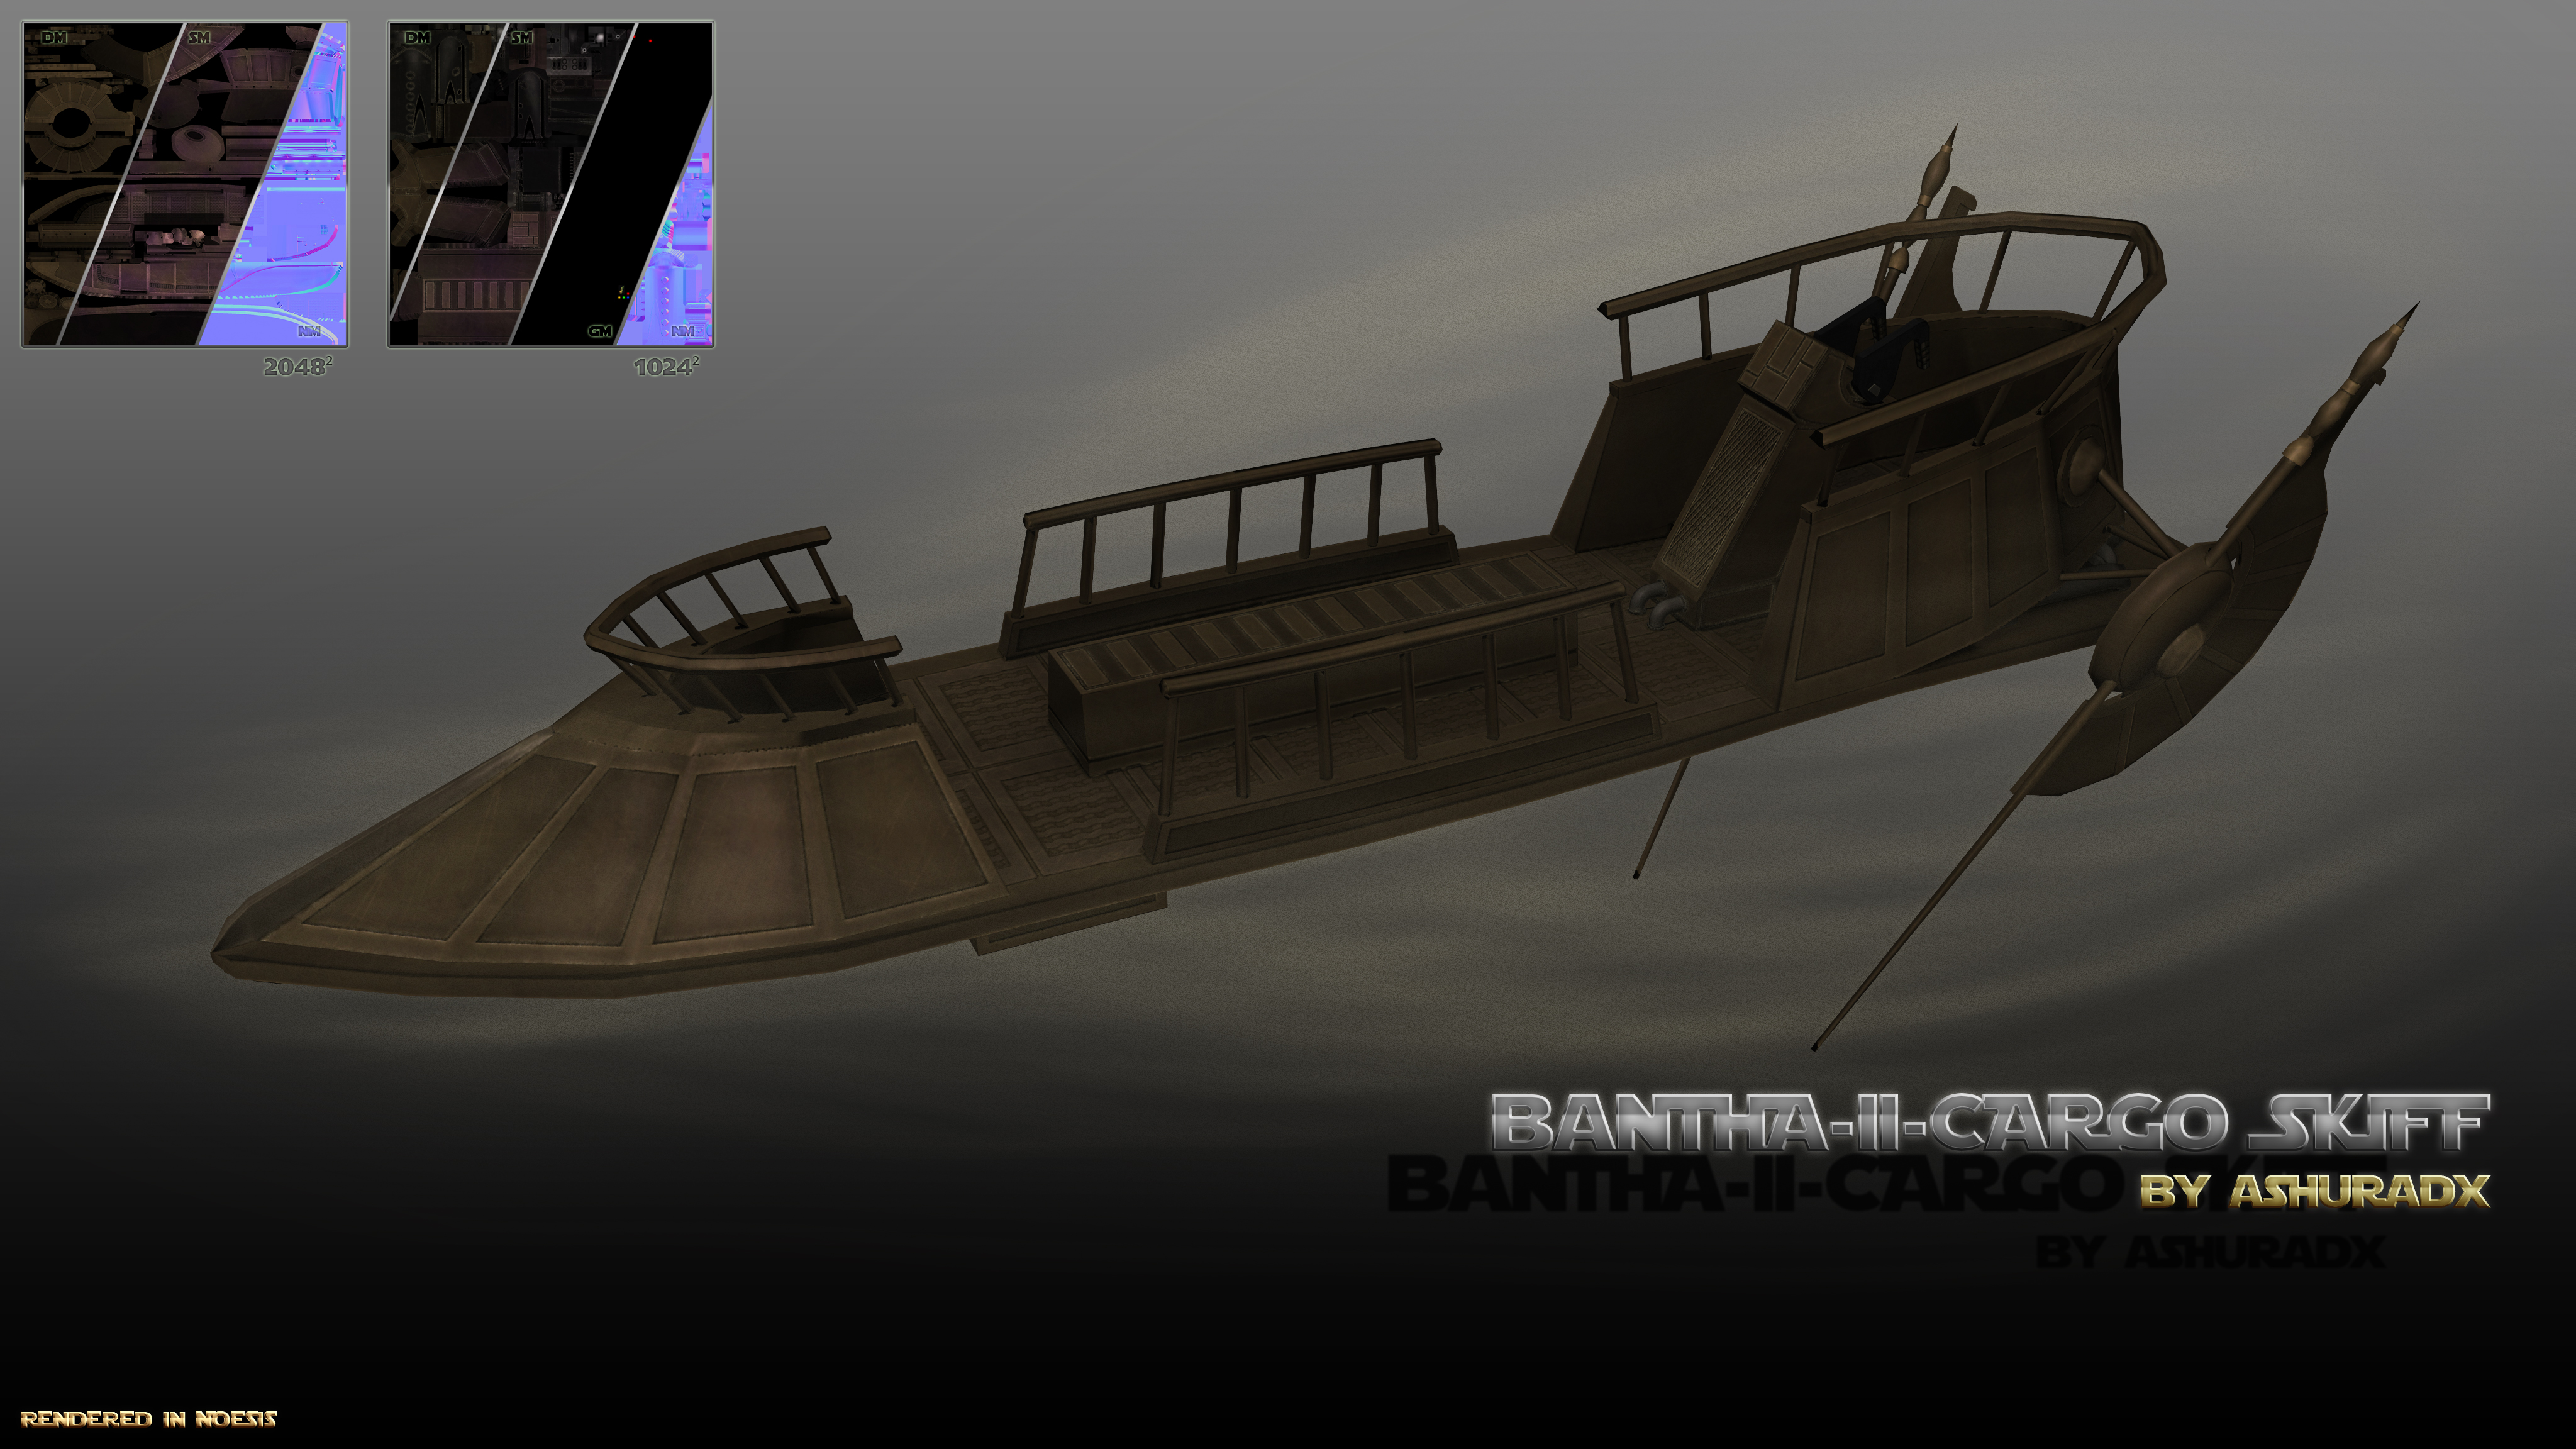 More information about "Bantha-II-Cargo Skiff"